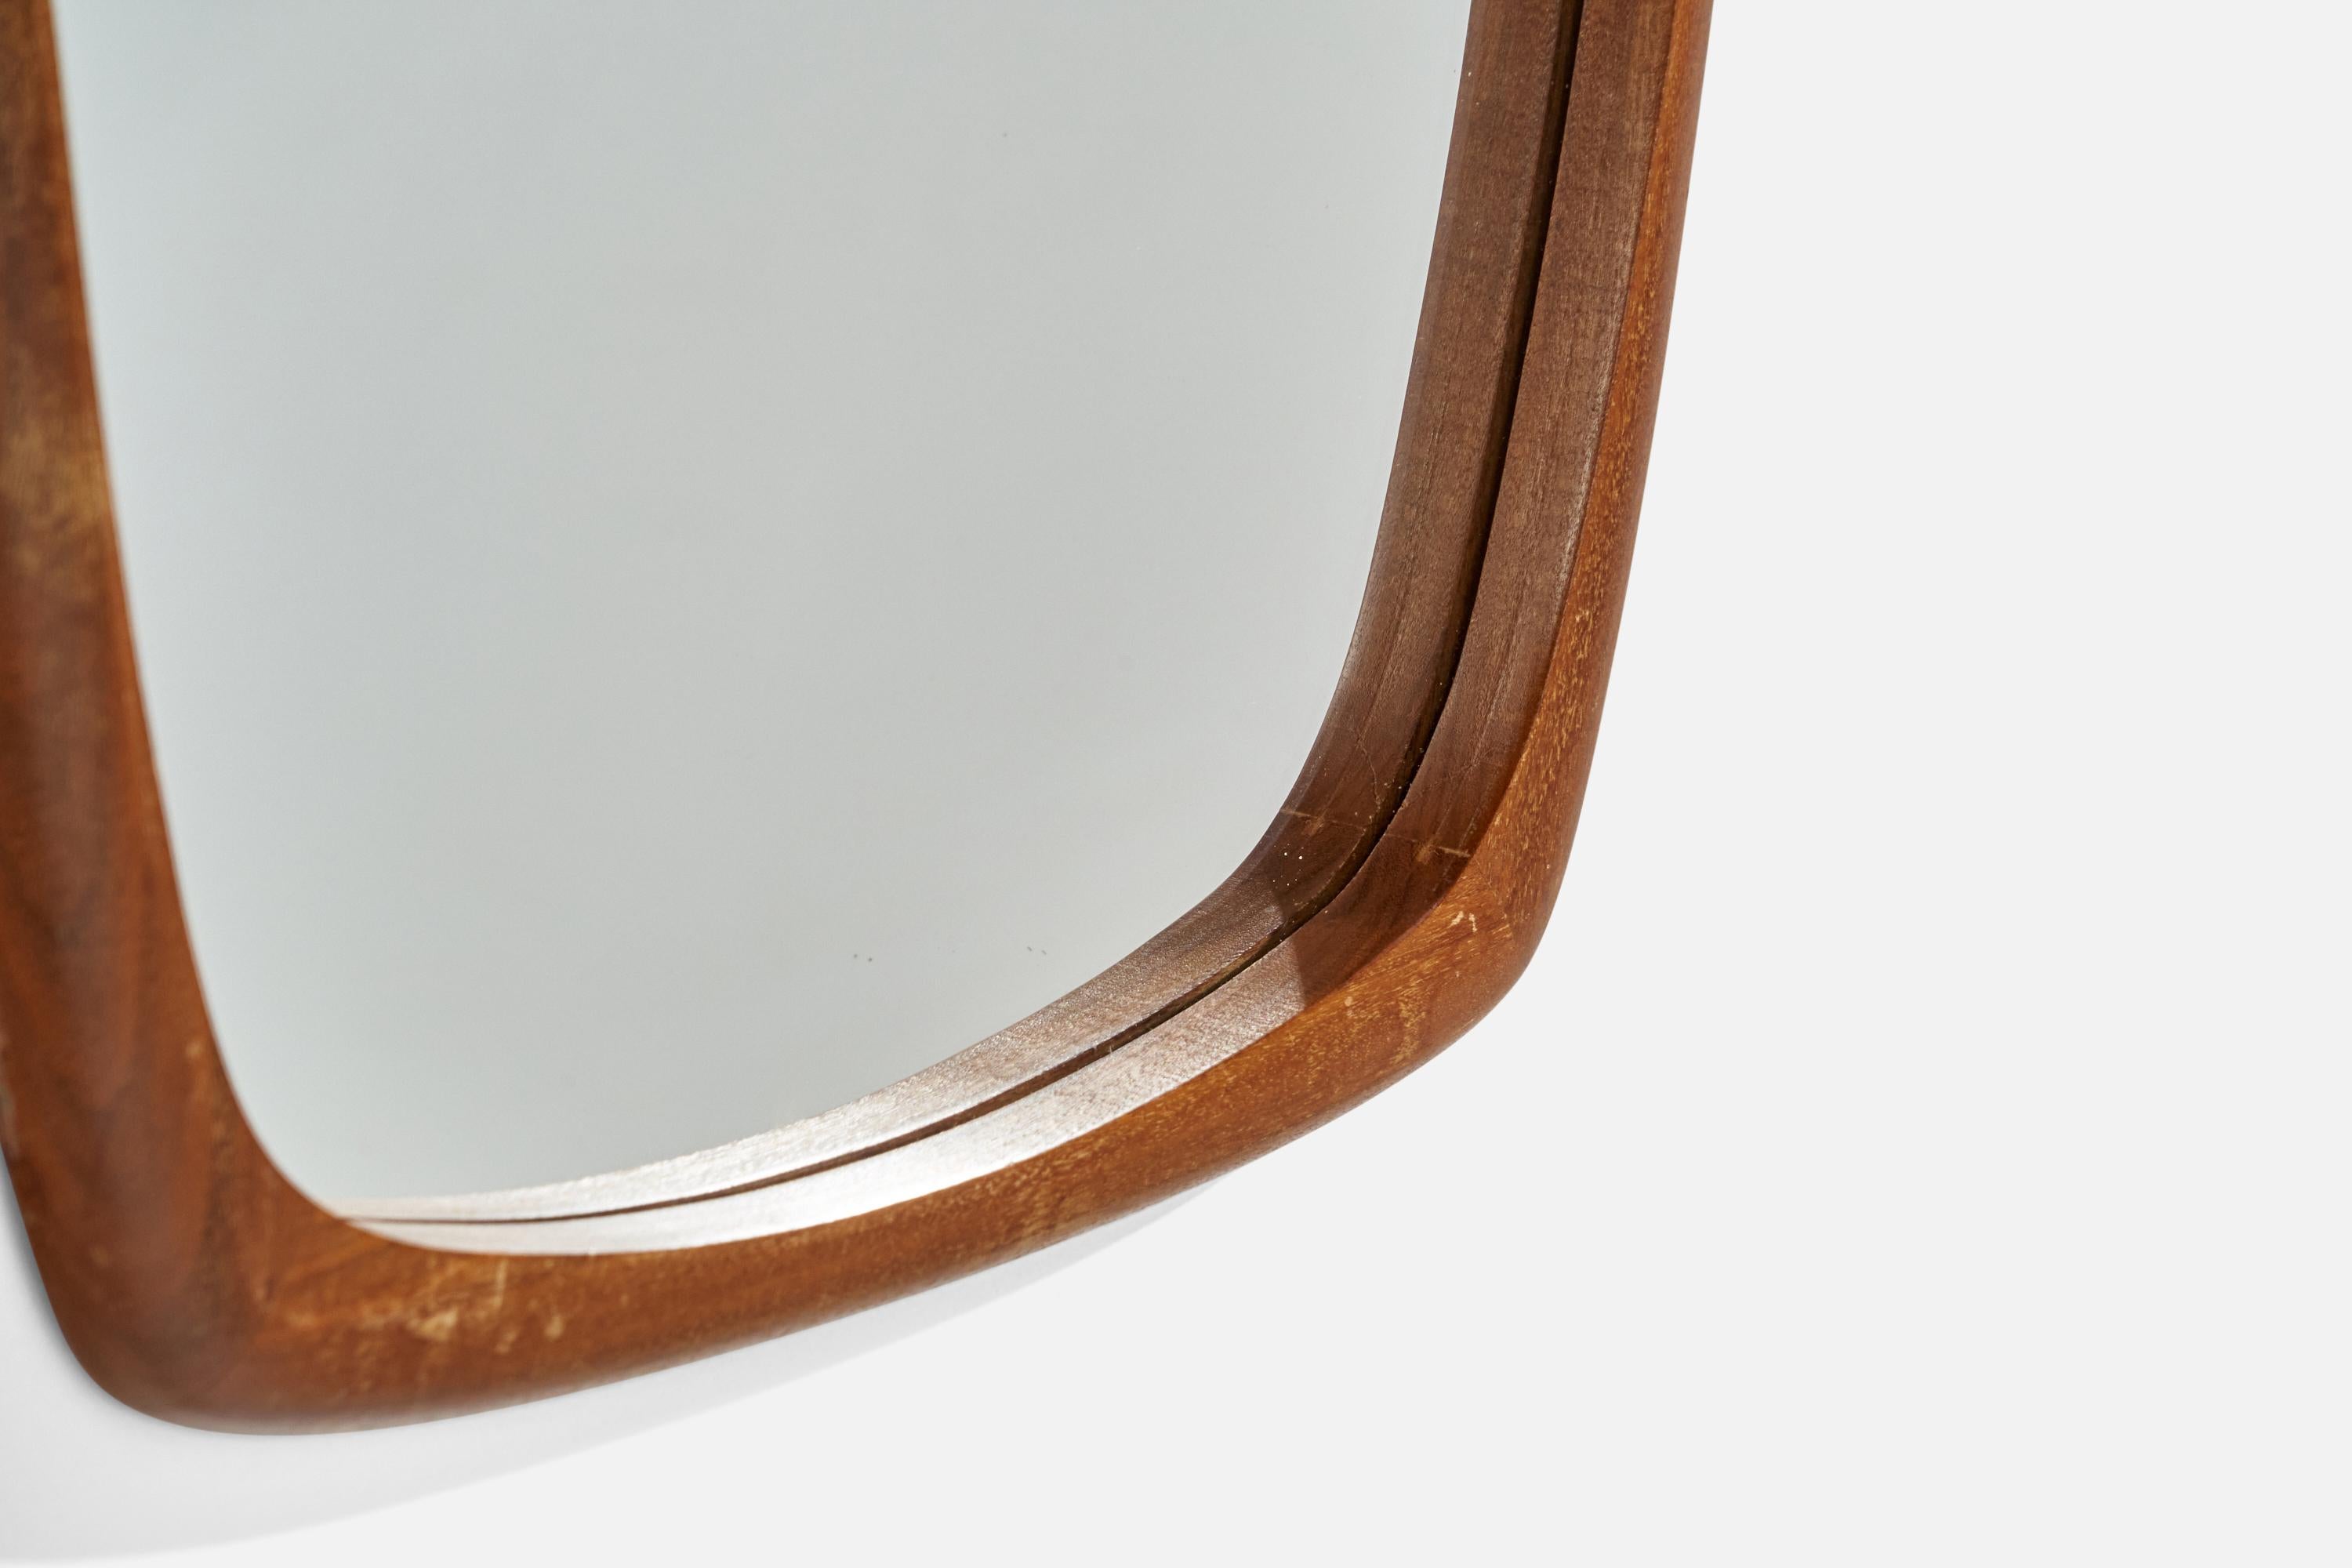 A wall mirror, designed and produced in Sweden, c. 1950s. In finely carved solid teak. Original mirror glass.

Width measured from the widest point.